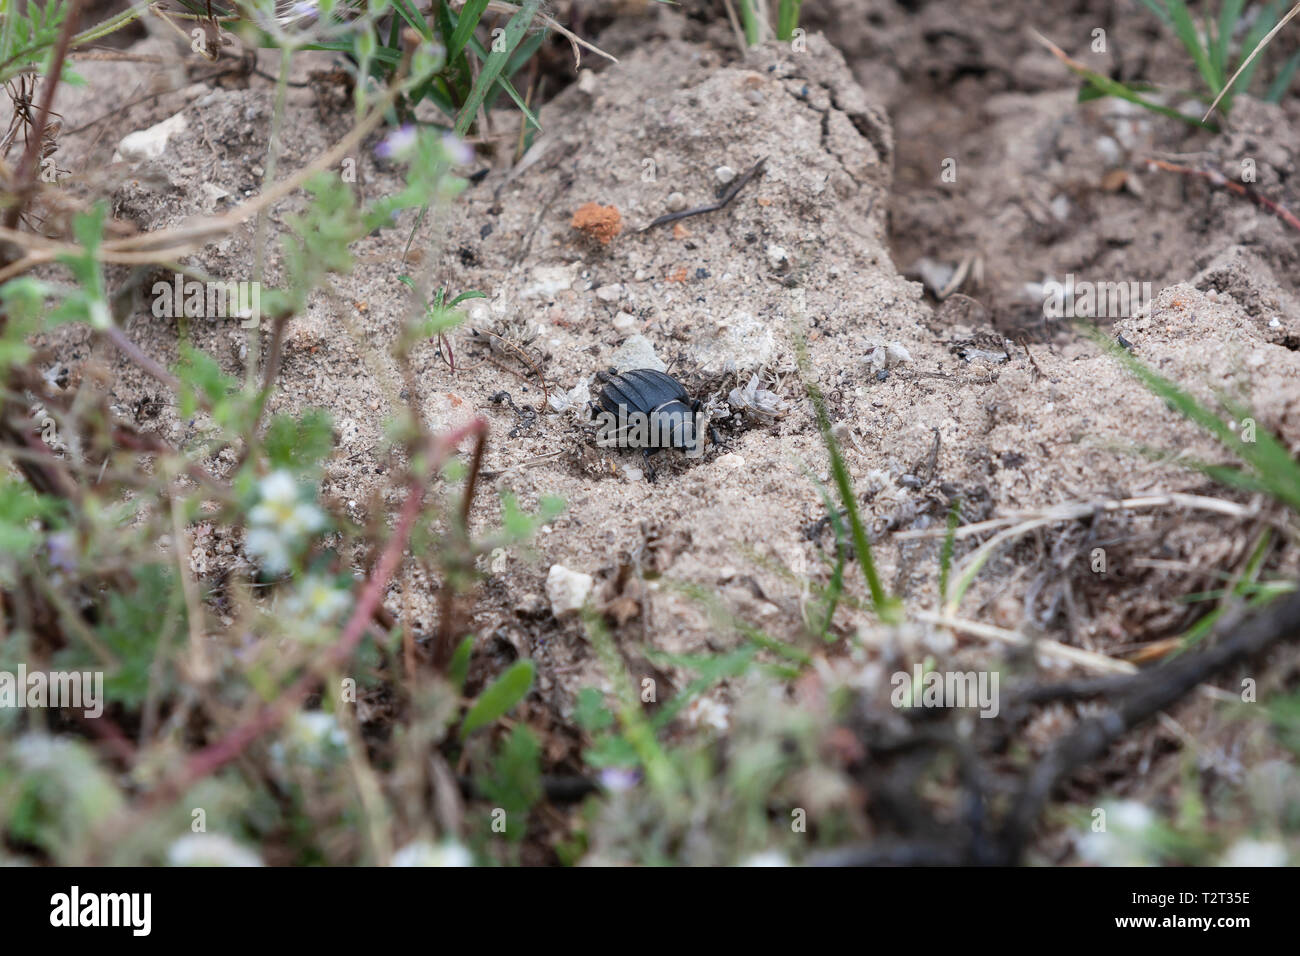 Beetle rolls dung in the field in search of scabs to make its balls. Stock Photo